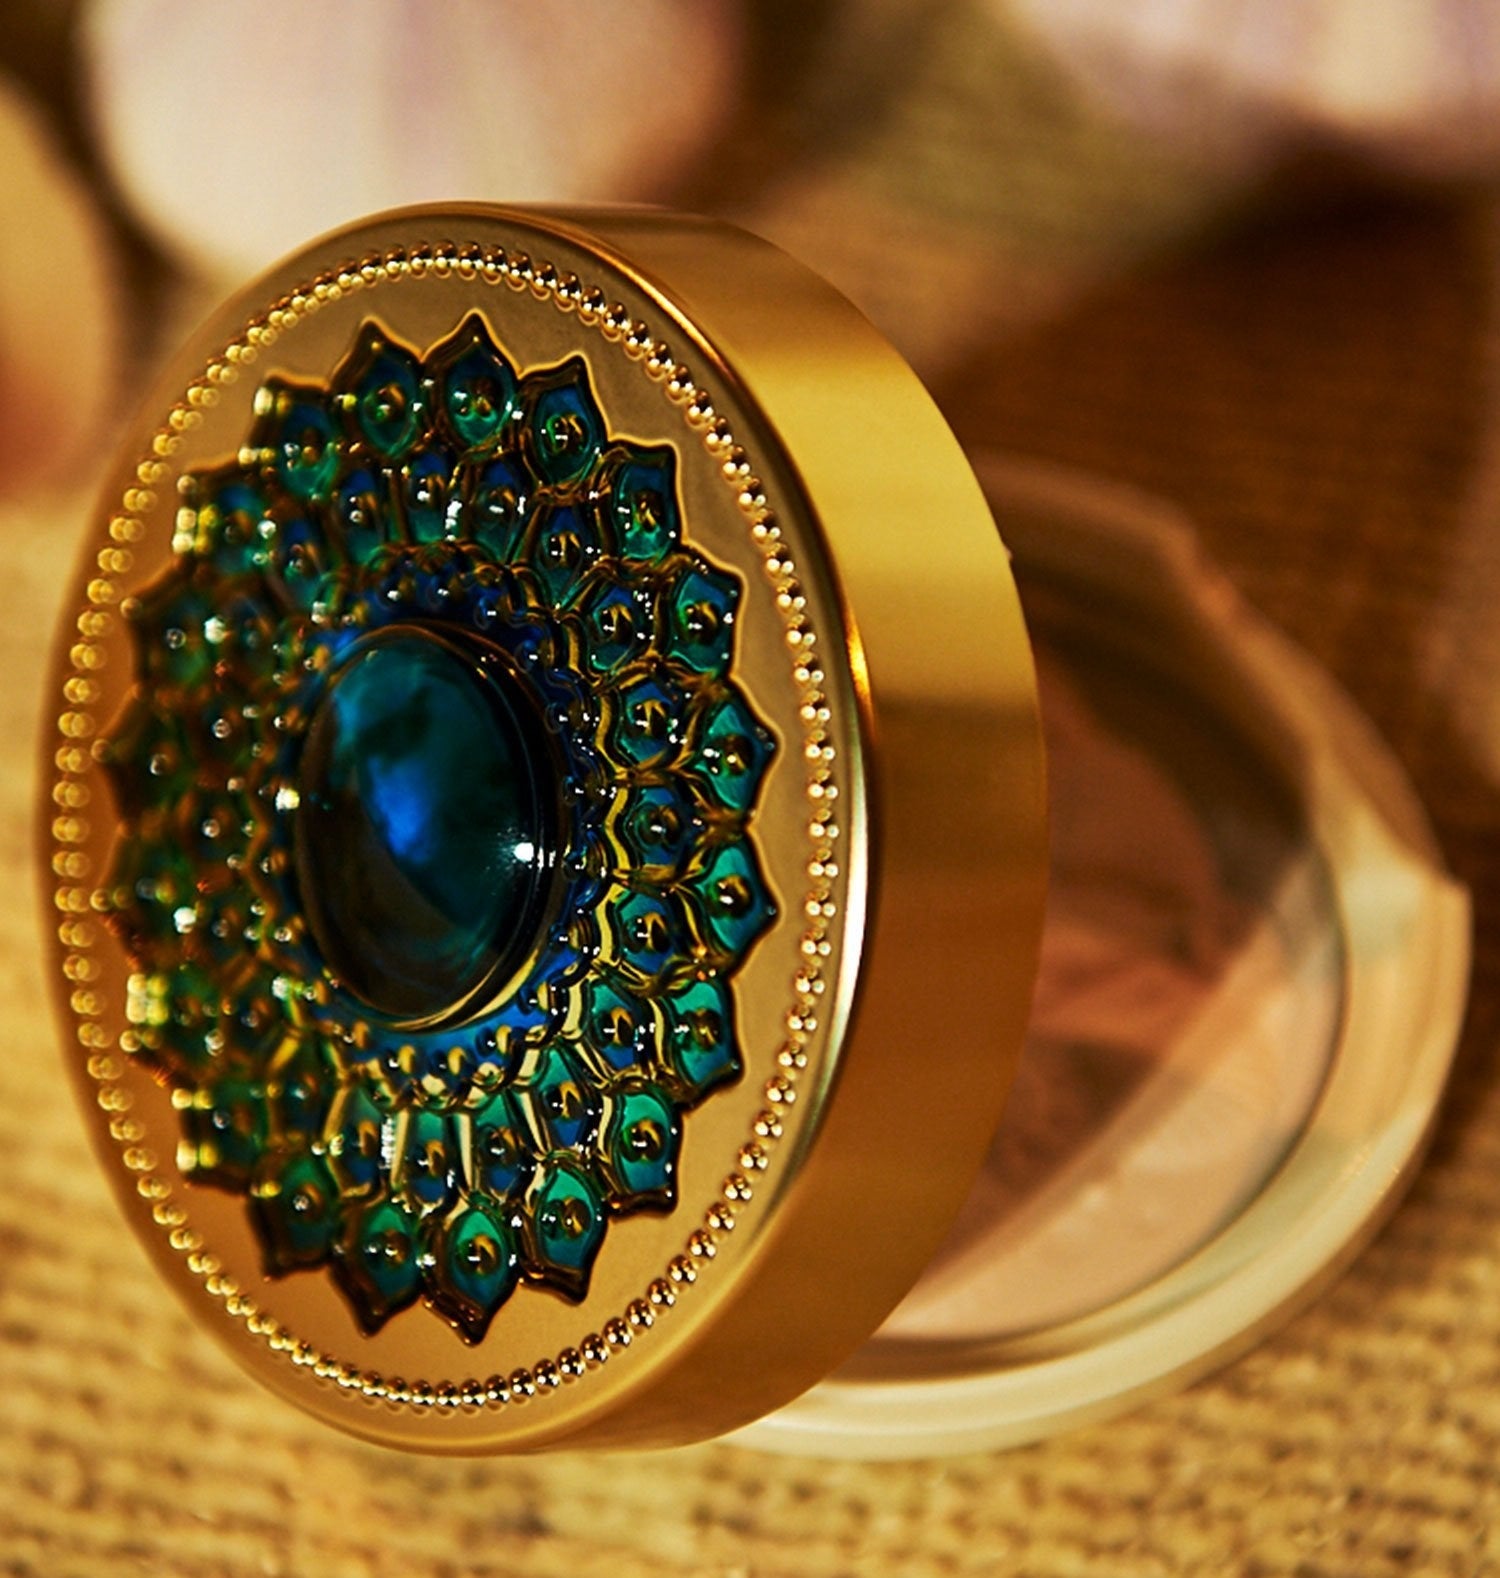 the gold case with a blue jewel in the center